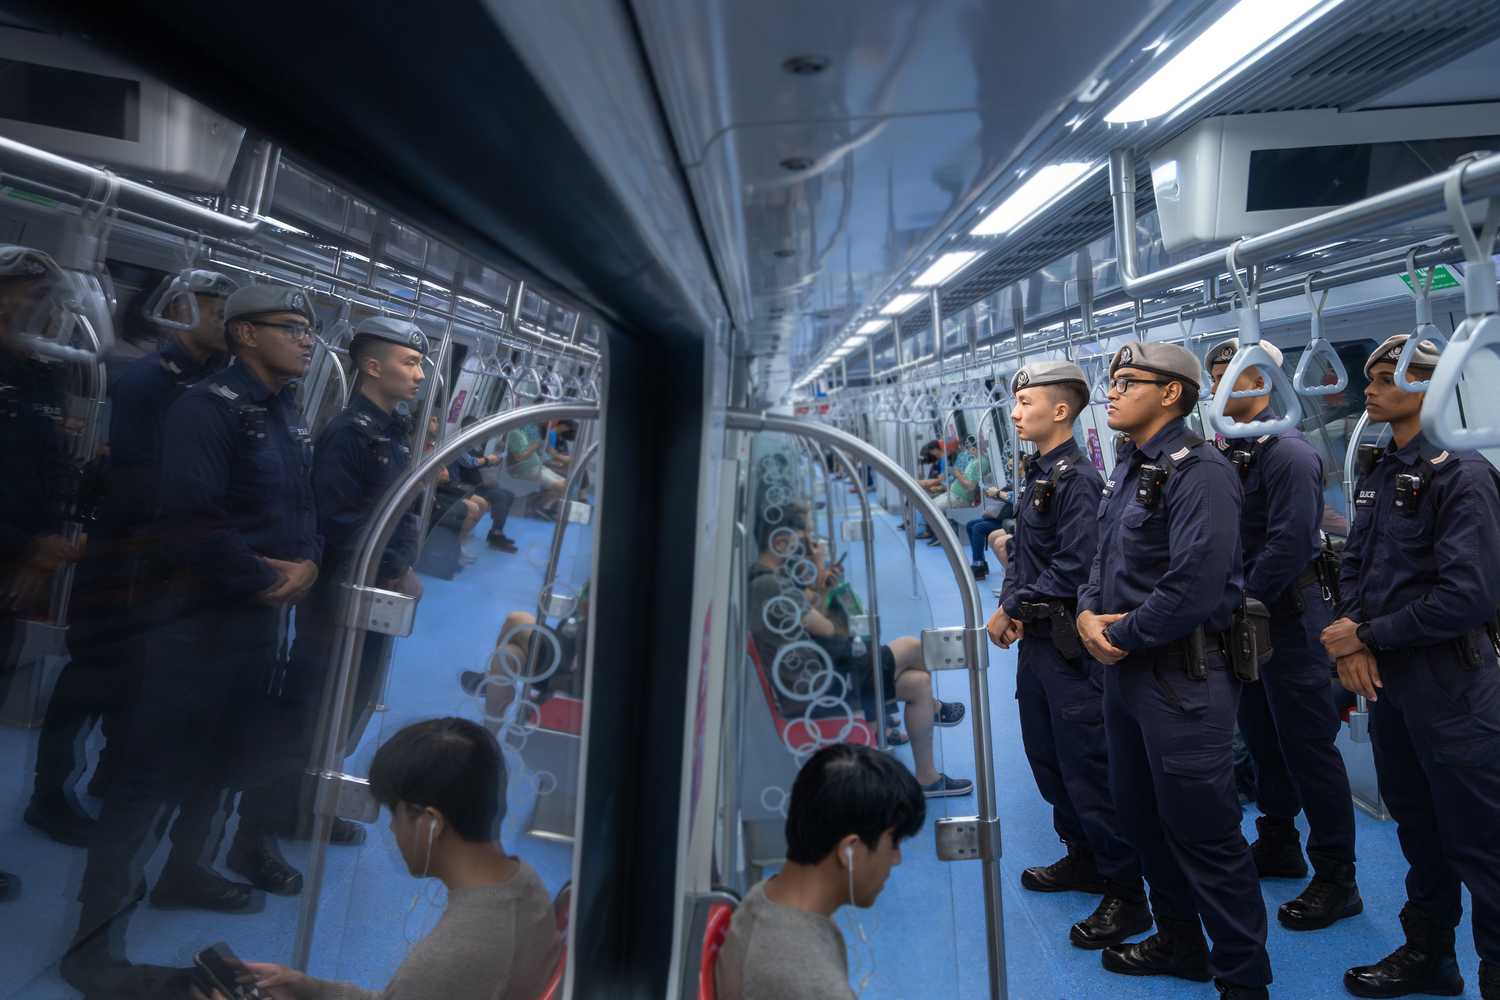 officers facing the left and can be seen in the reflection of the moving train's window